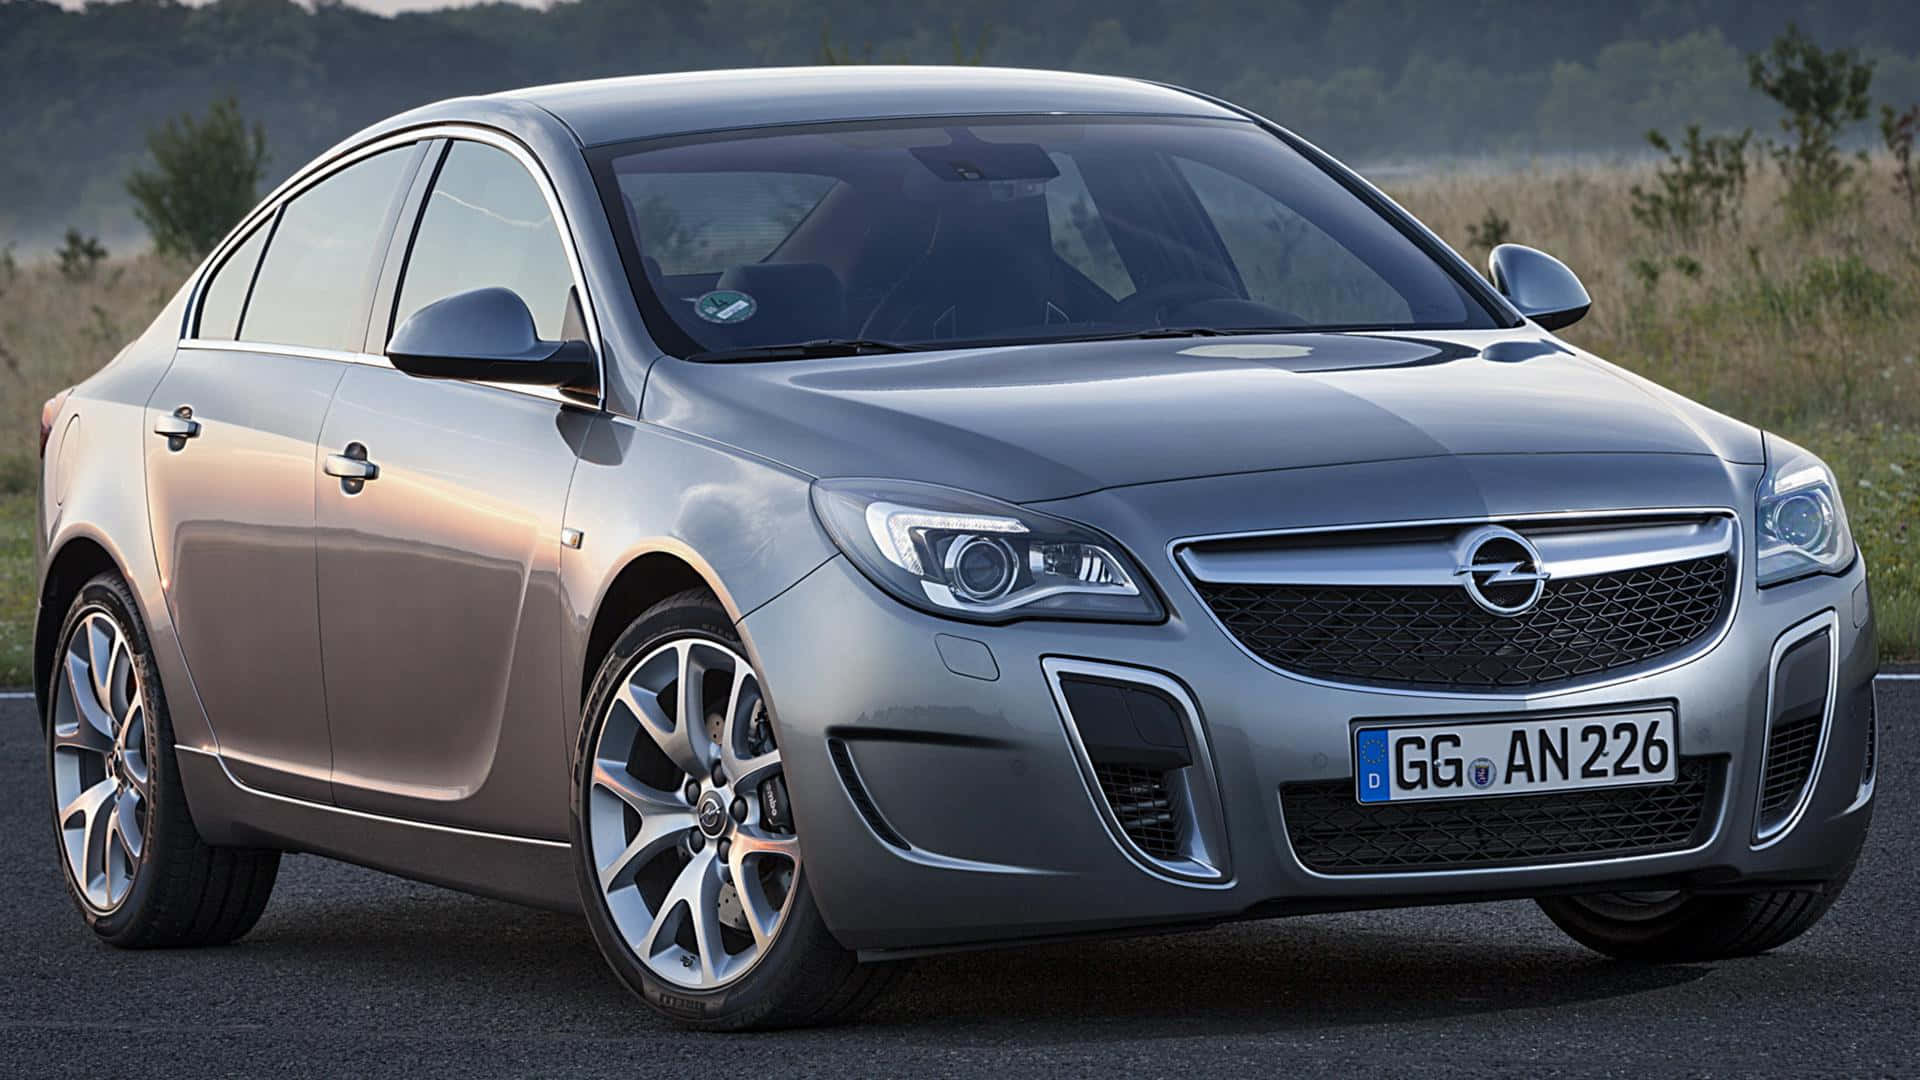 Opel Insignia in Thrilling Action Wallpaper